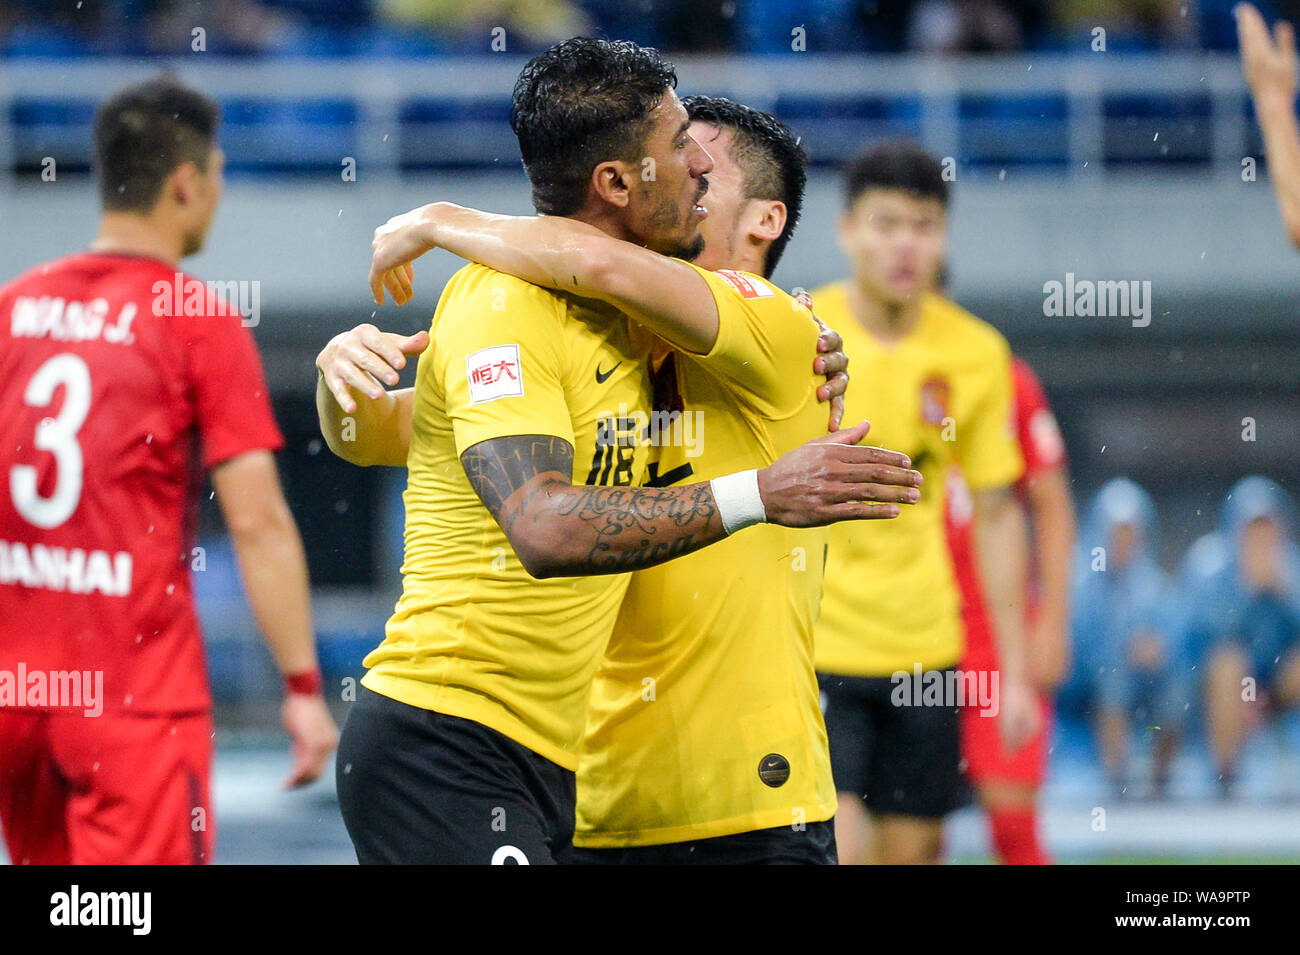 Brazilian football player Paulinho, left, of Guangzhou Evergrande Taobao celebrates with his teammate after scoring against Tianjin Tianhai in their 1 Stock Photo